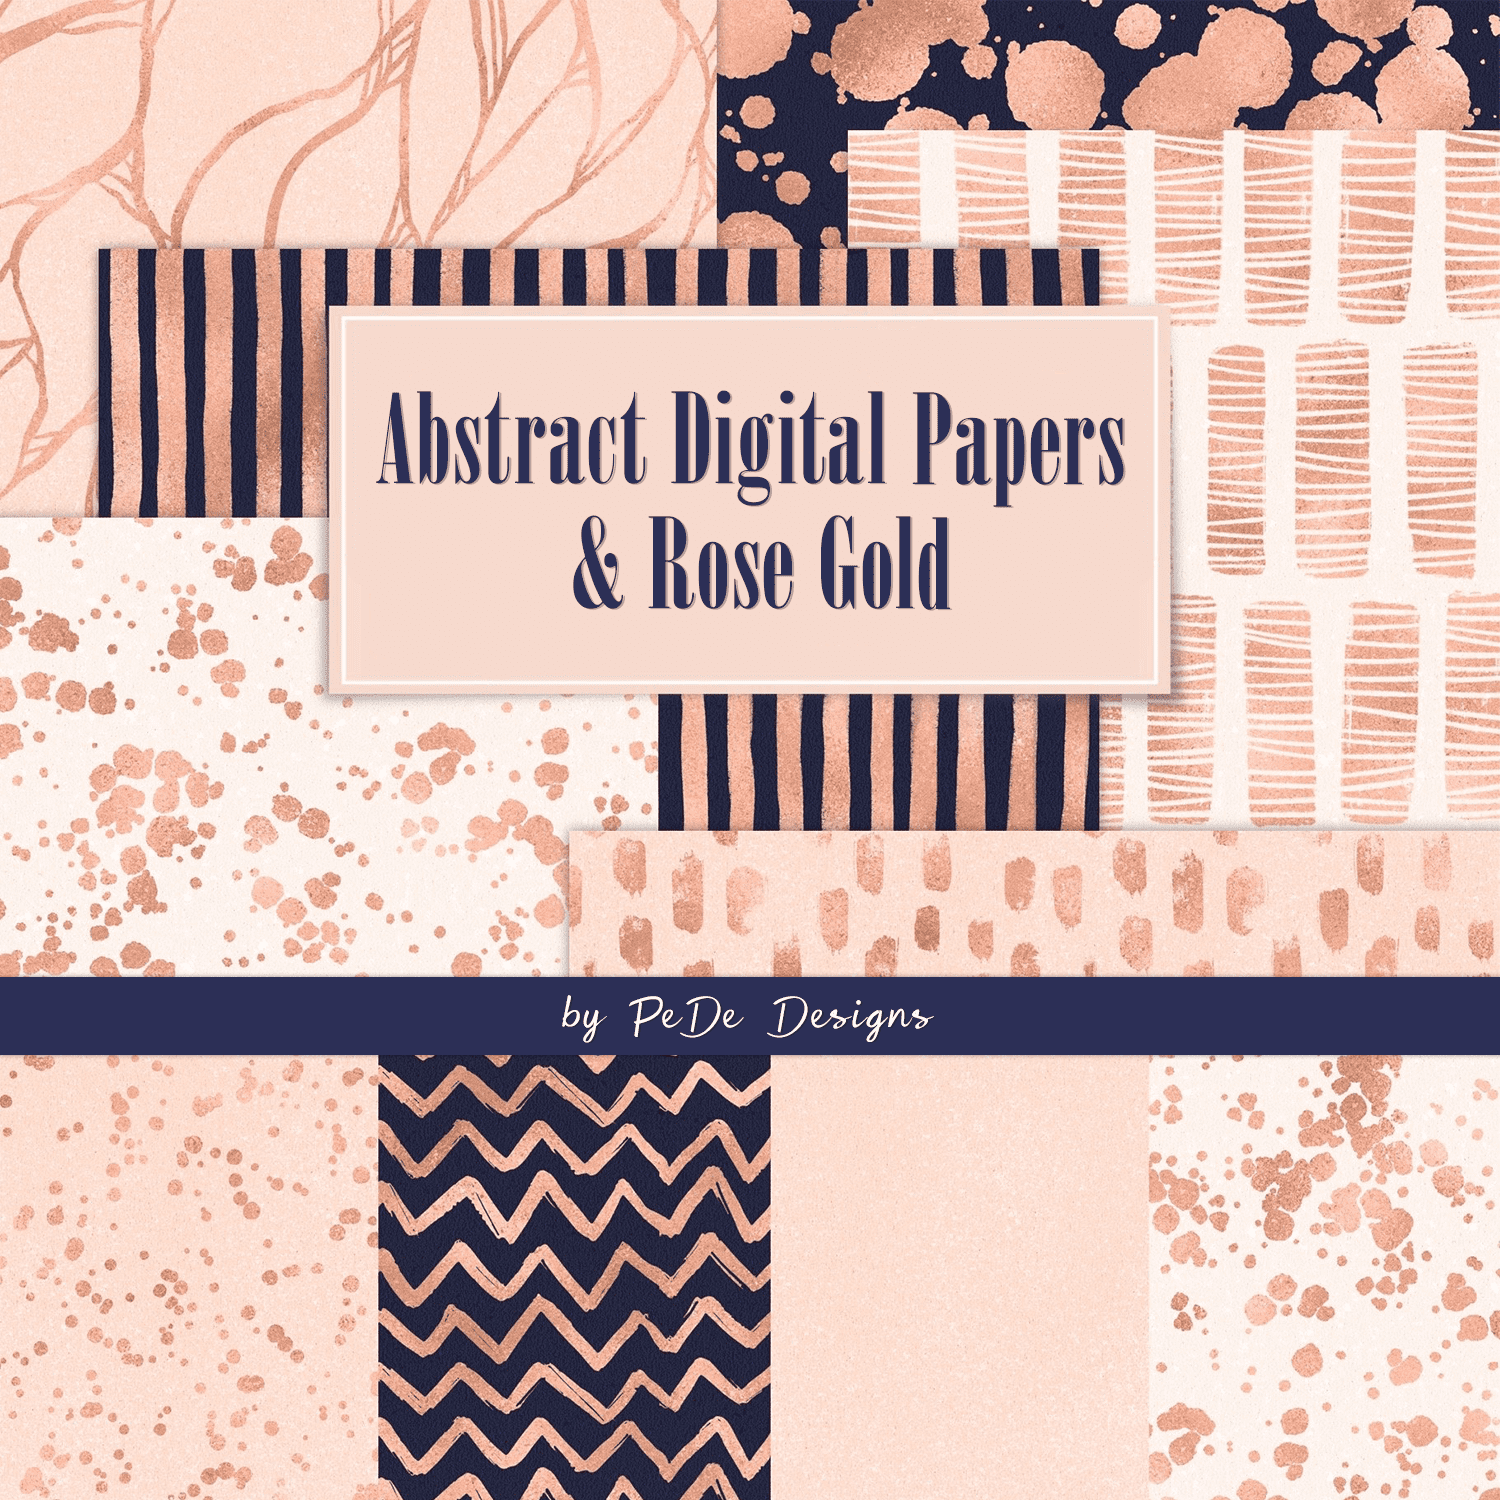 Abstract Digital Papers & Rose Gold Cover.